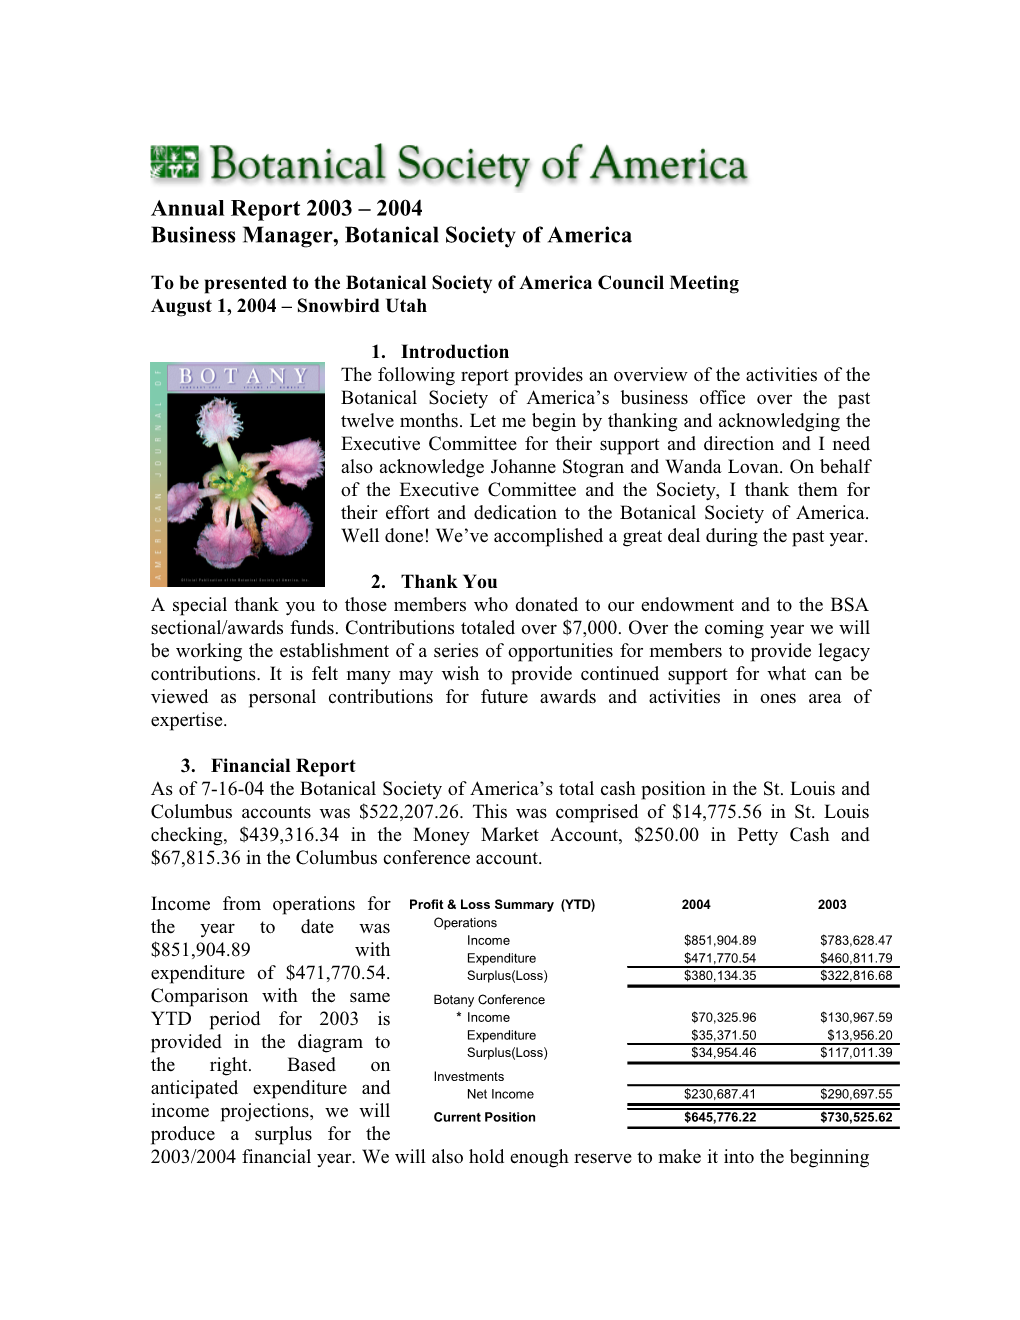 Business Manager, Botanical Society of America